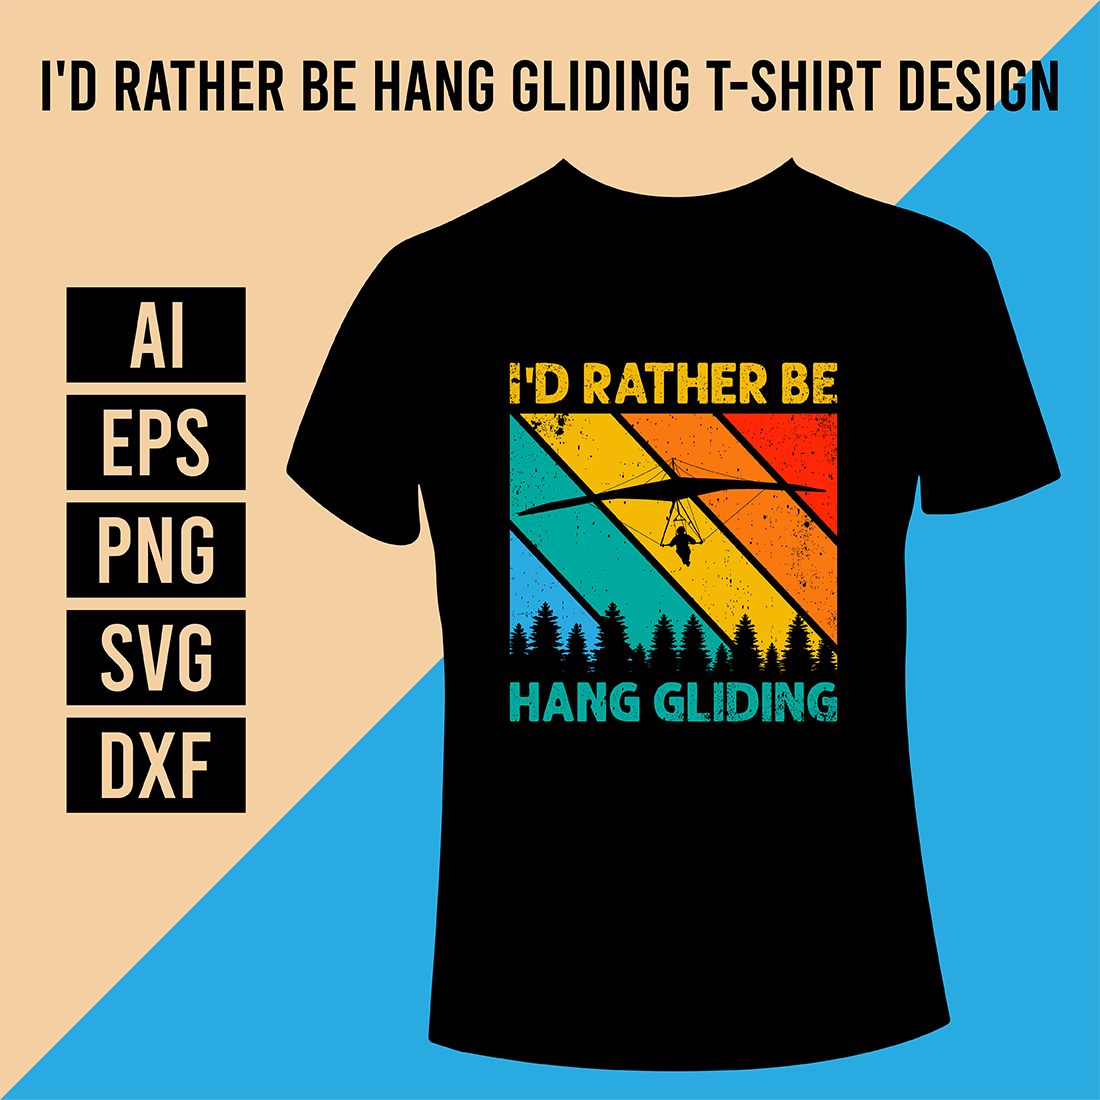 I'd Rather Be Hang Gliding T-Shirt Design cover image.